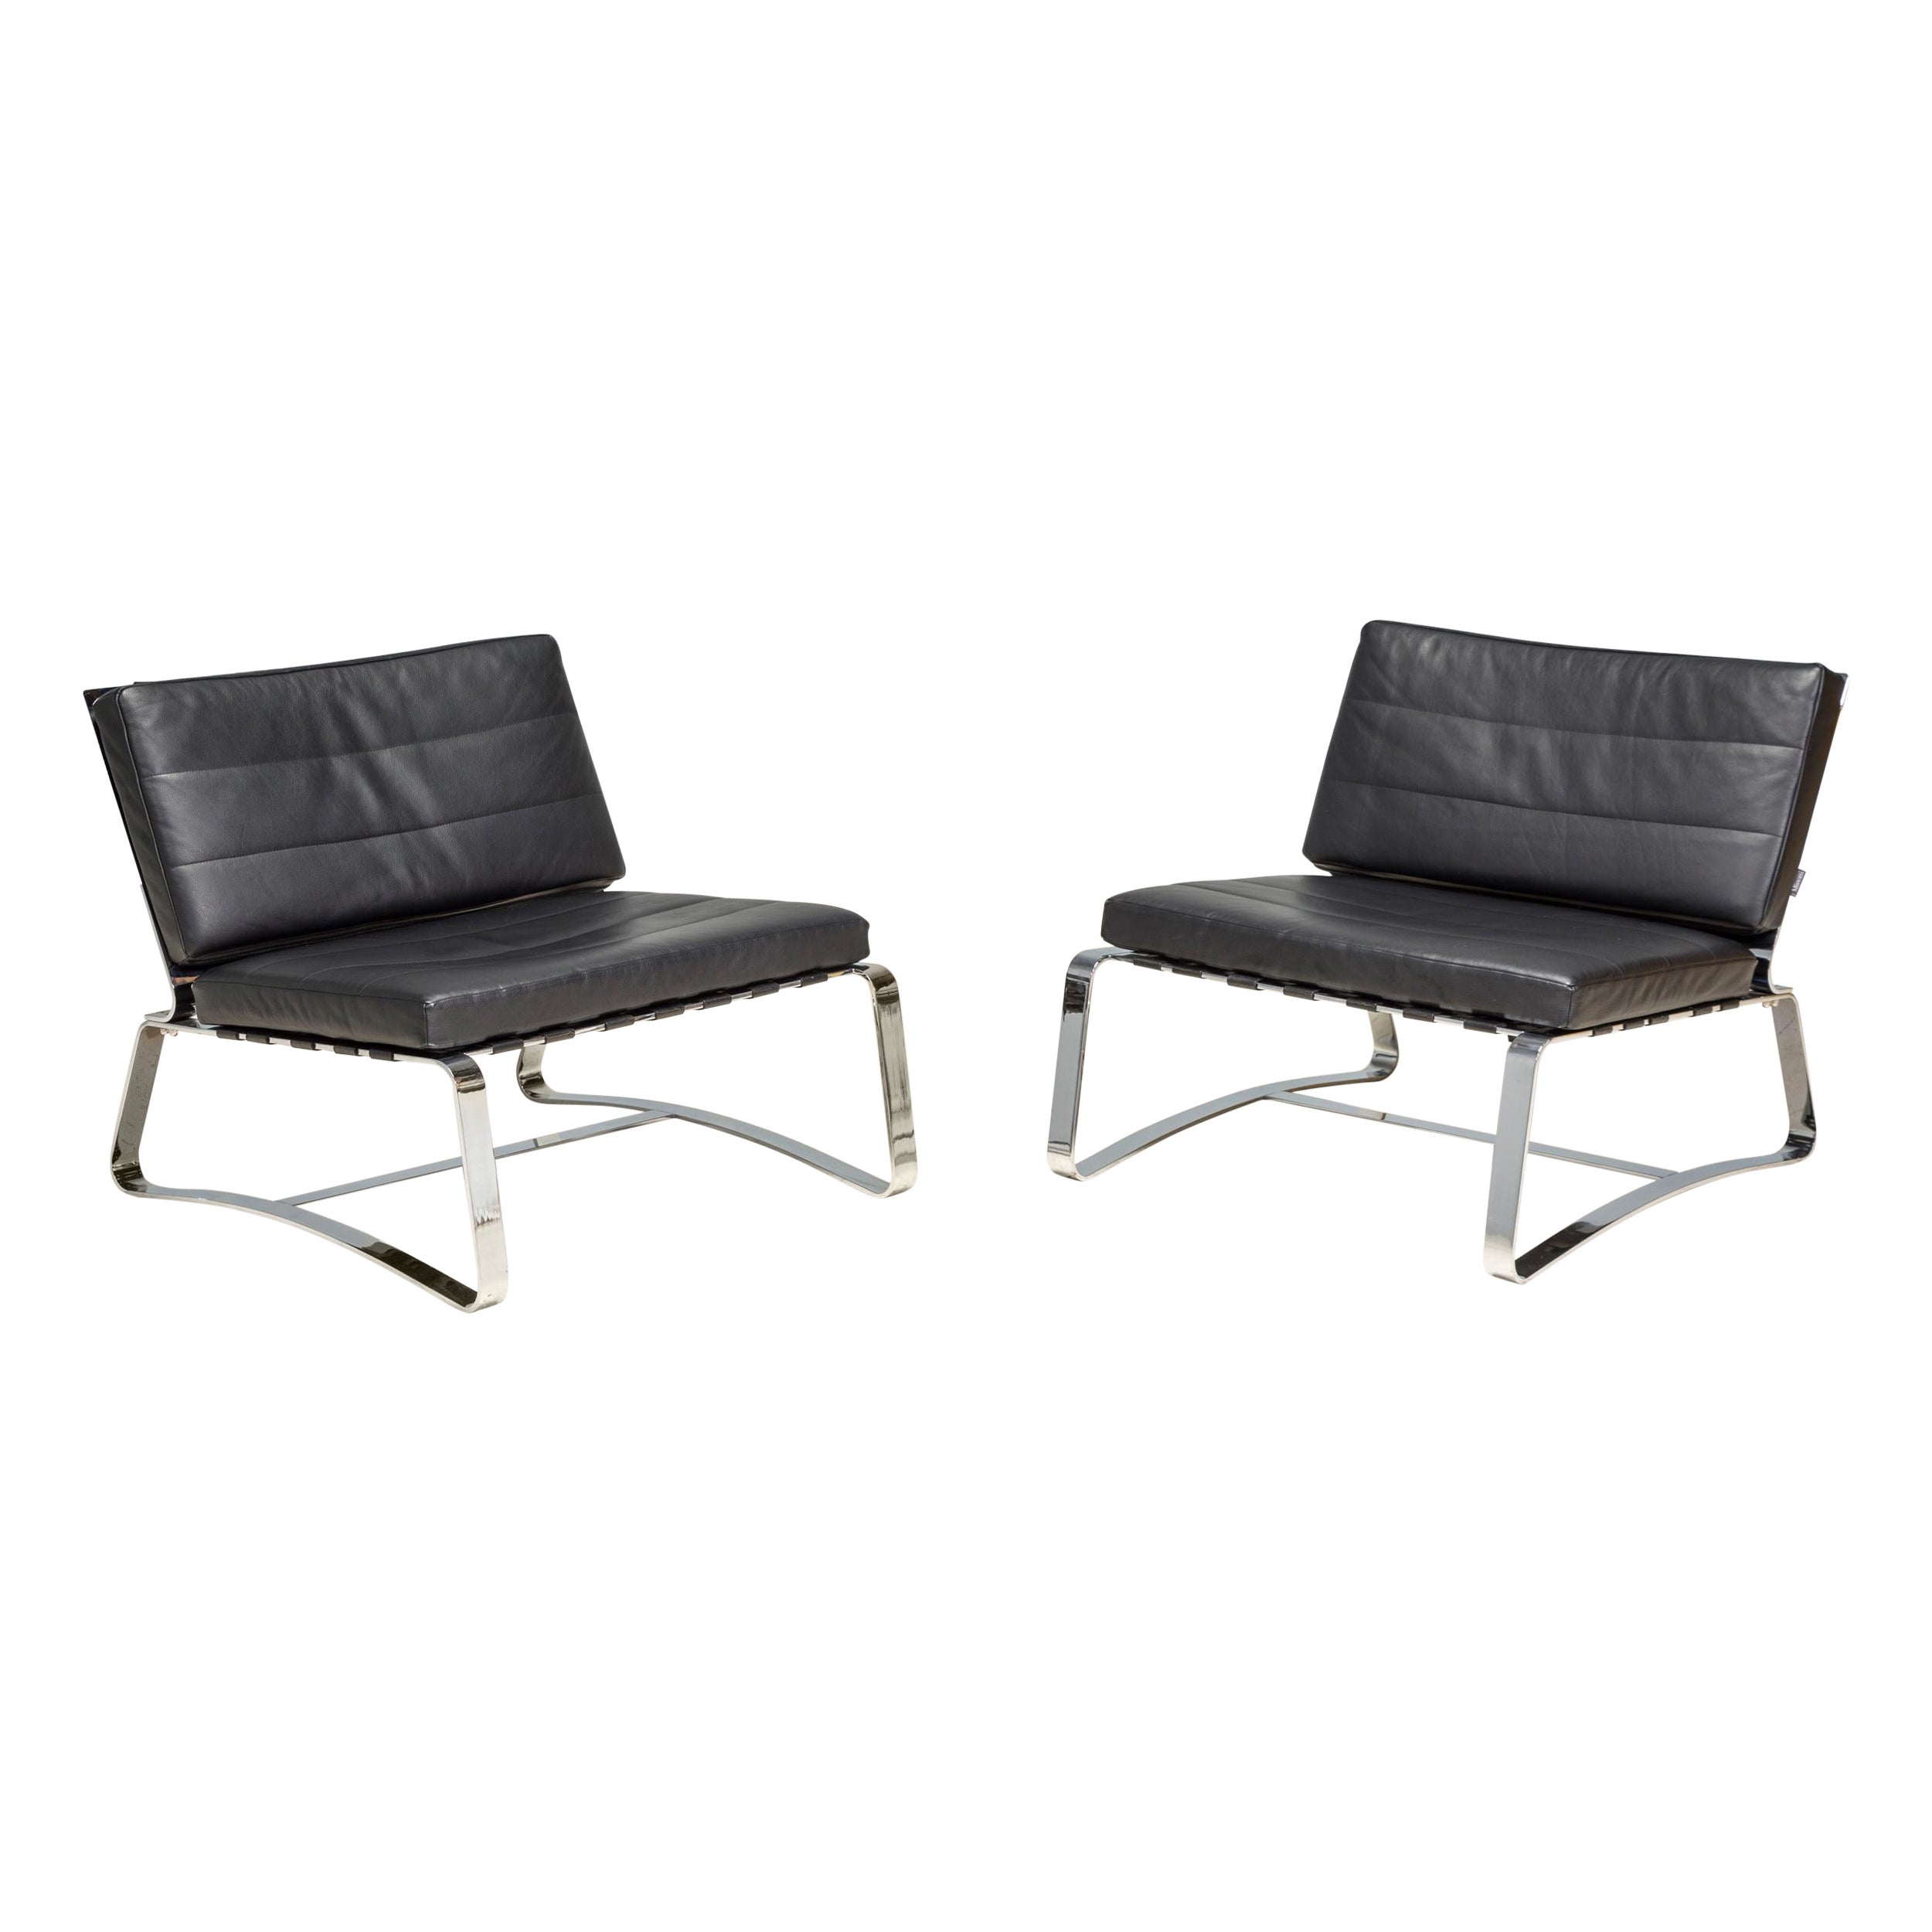 Rodolfo Dordoni for Minotti Black Leather Delaunay Lounge Chair, Set of 2 For Sale